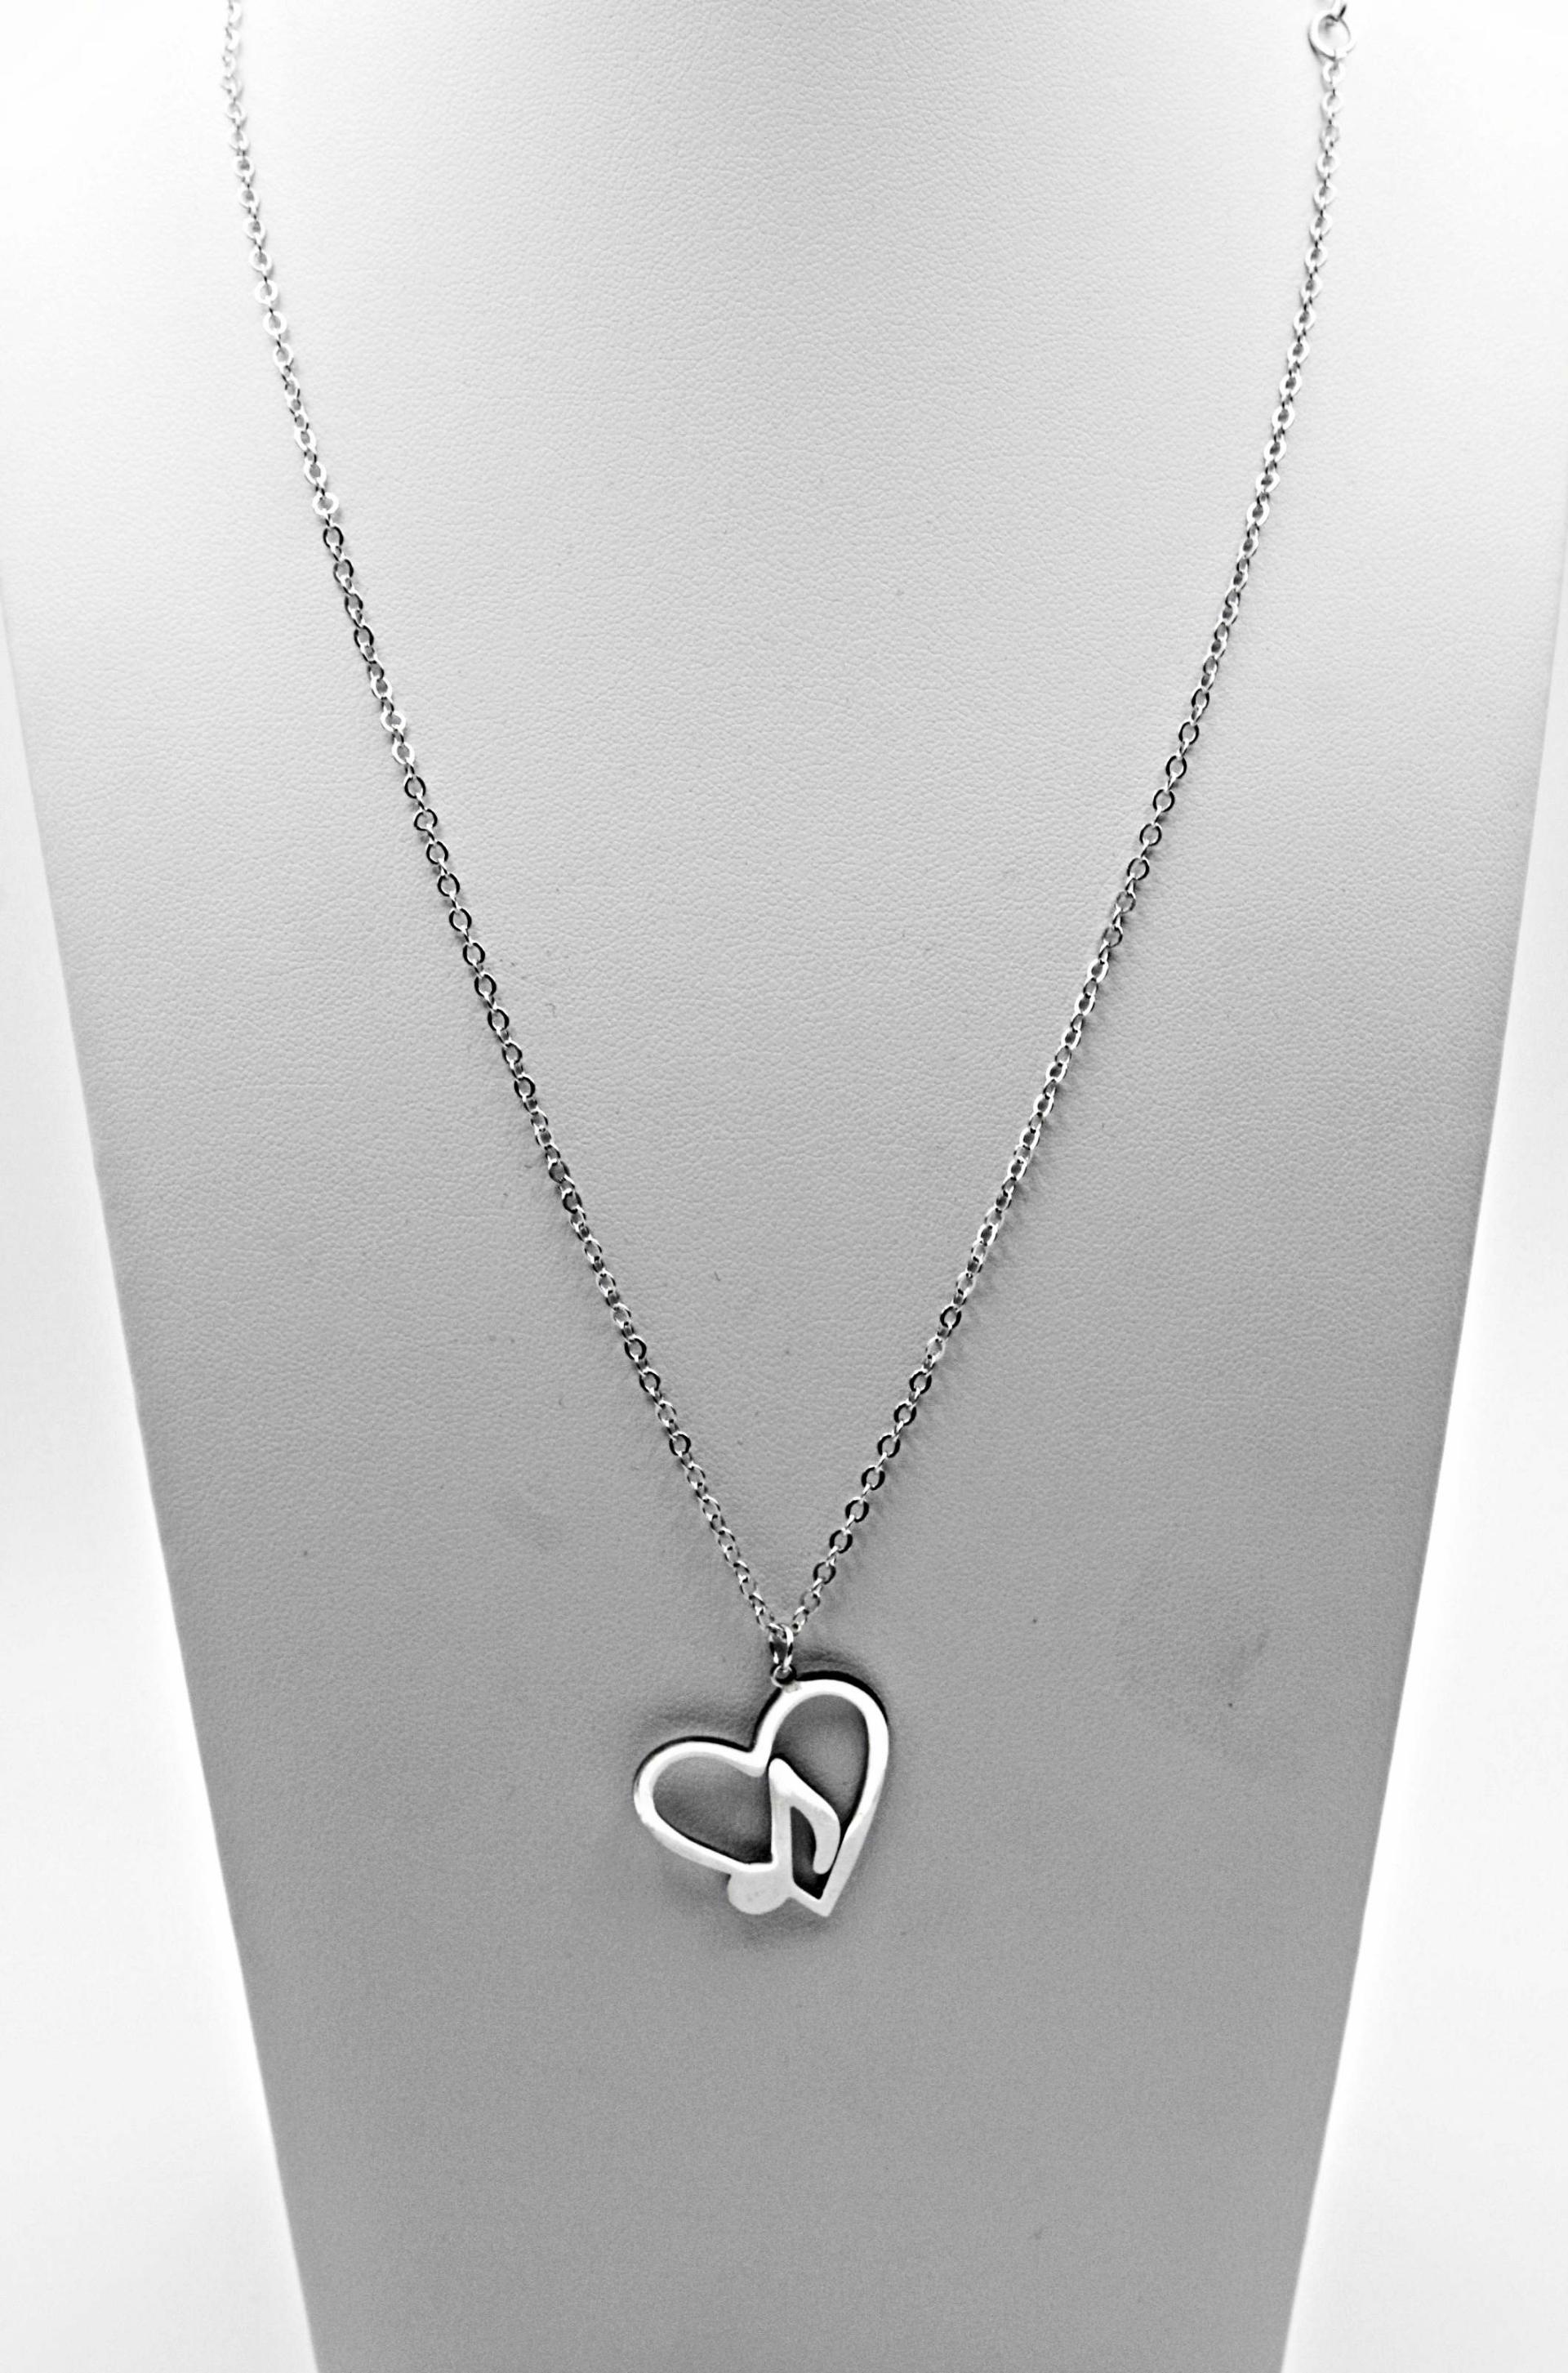 Music Note in Heart Necklace